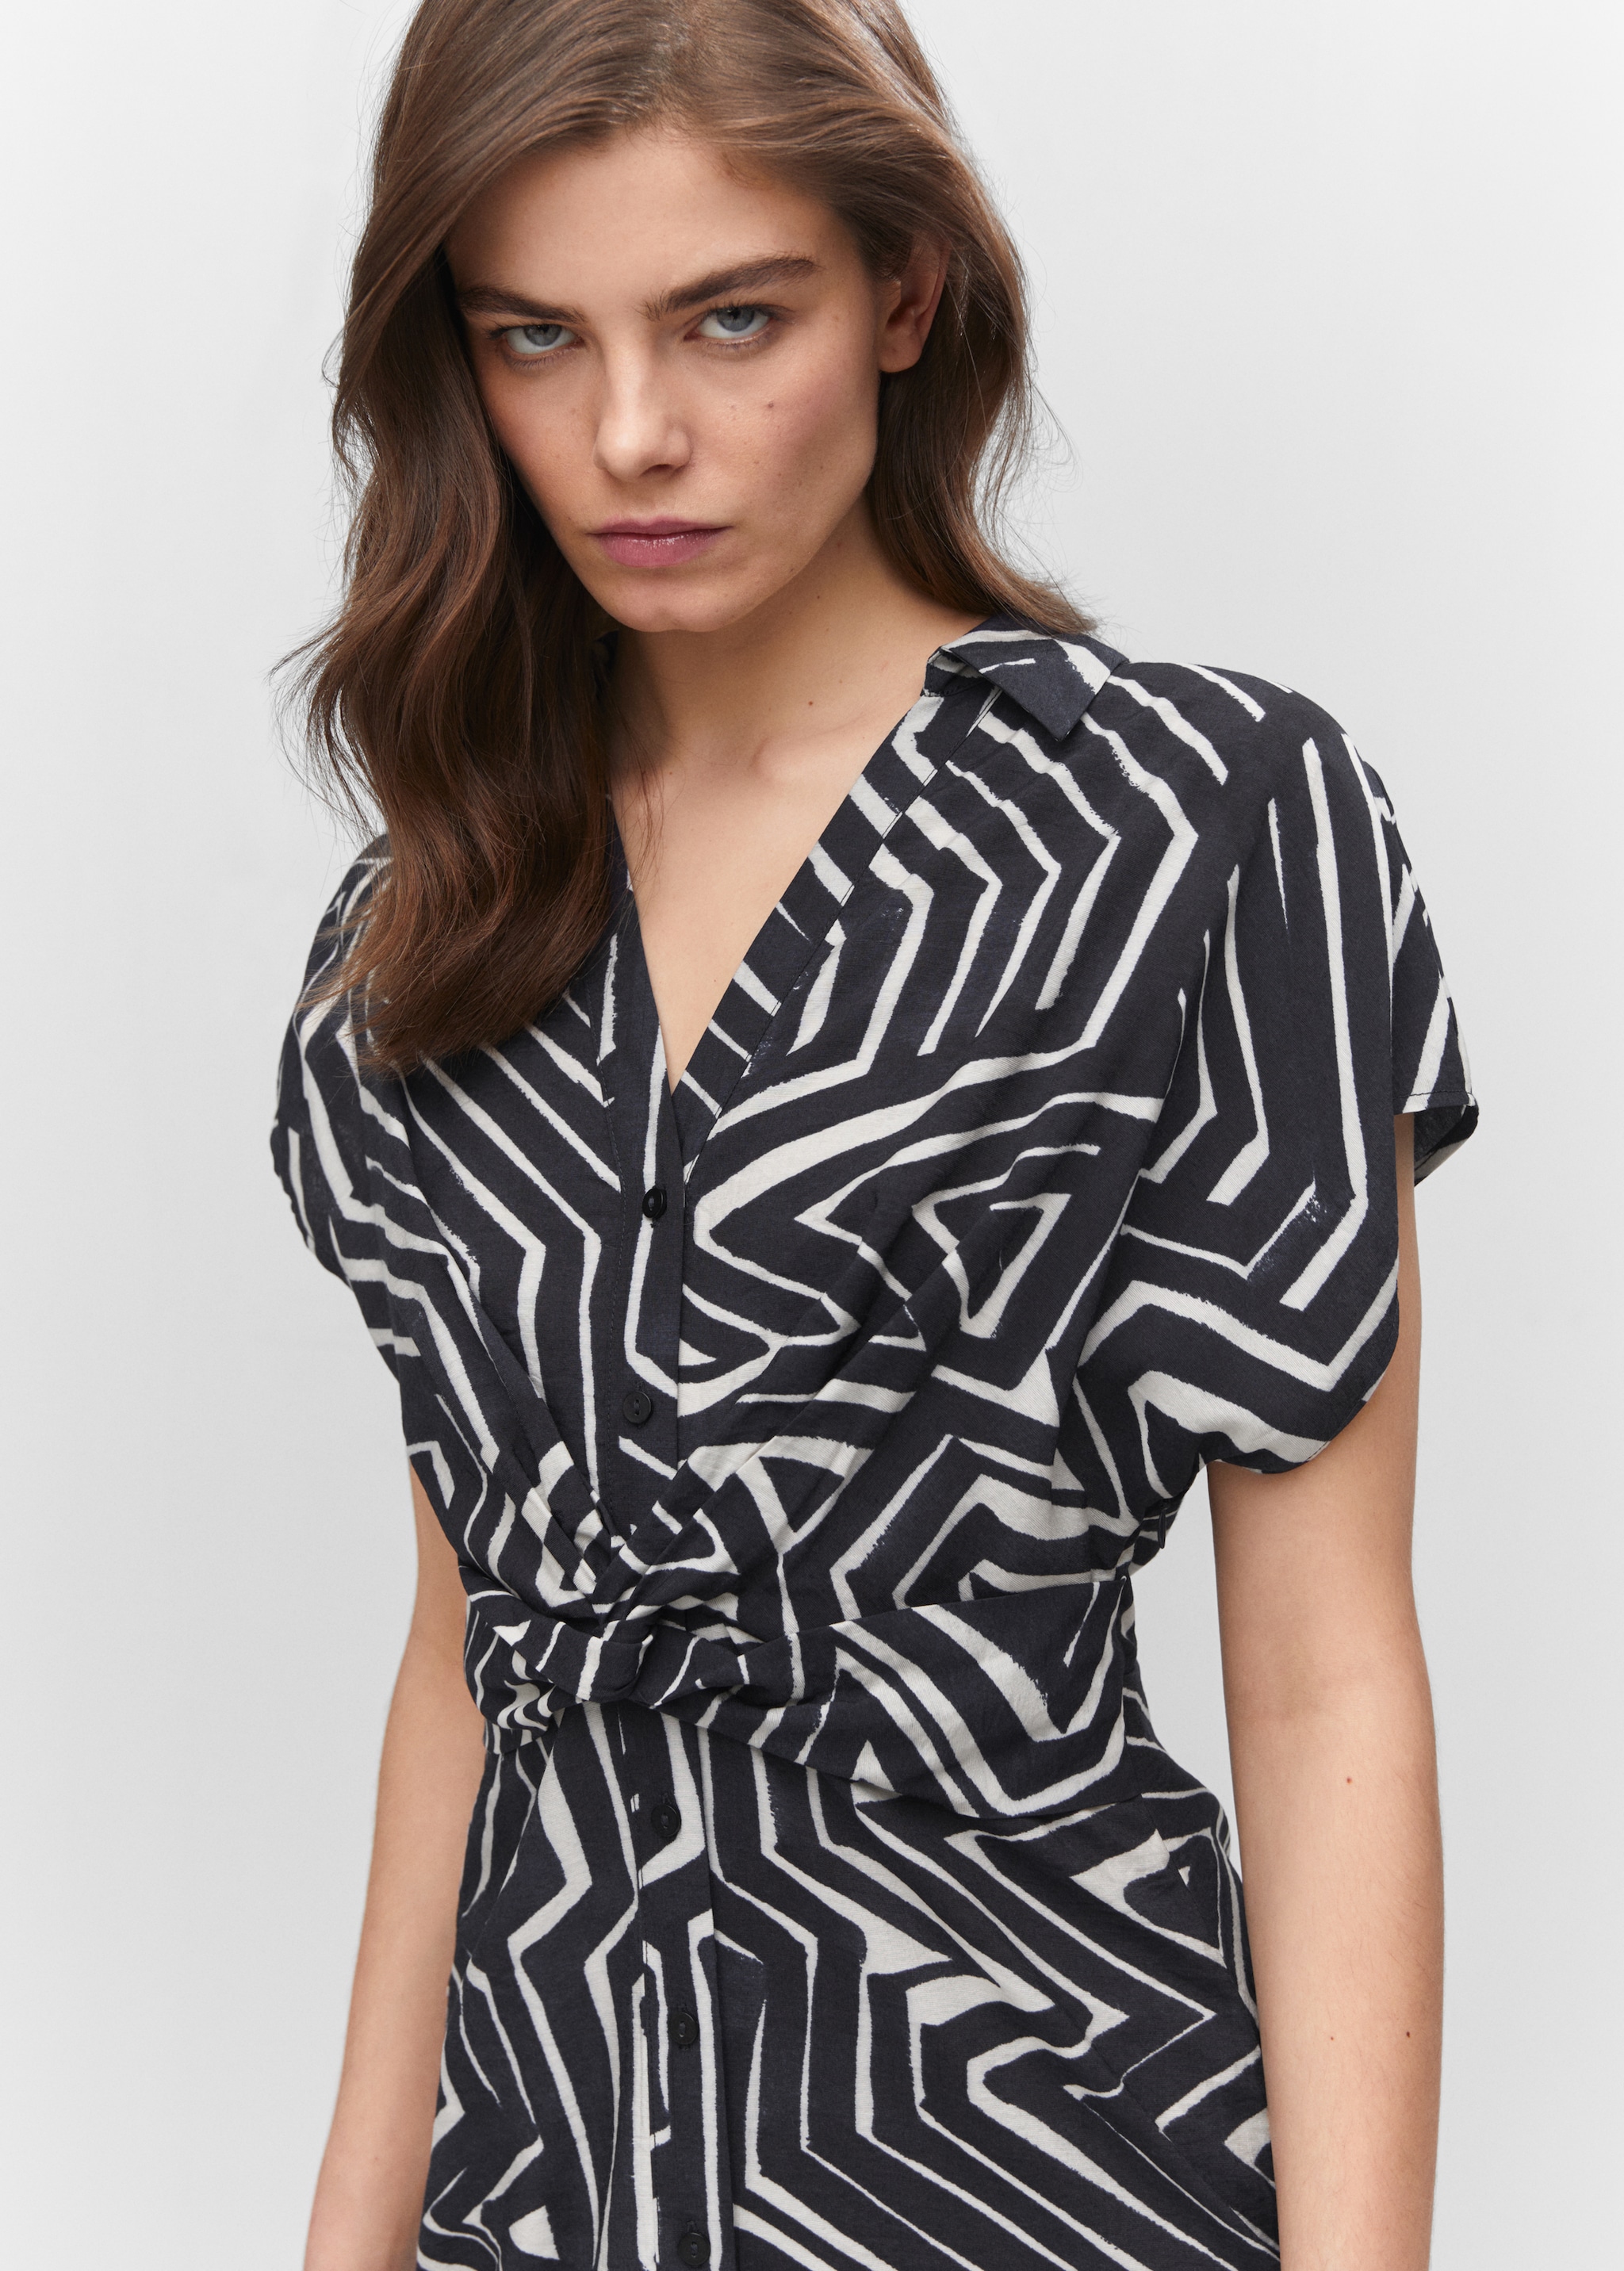 Tropical shirt dress - Details of the article 1